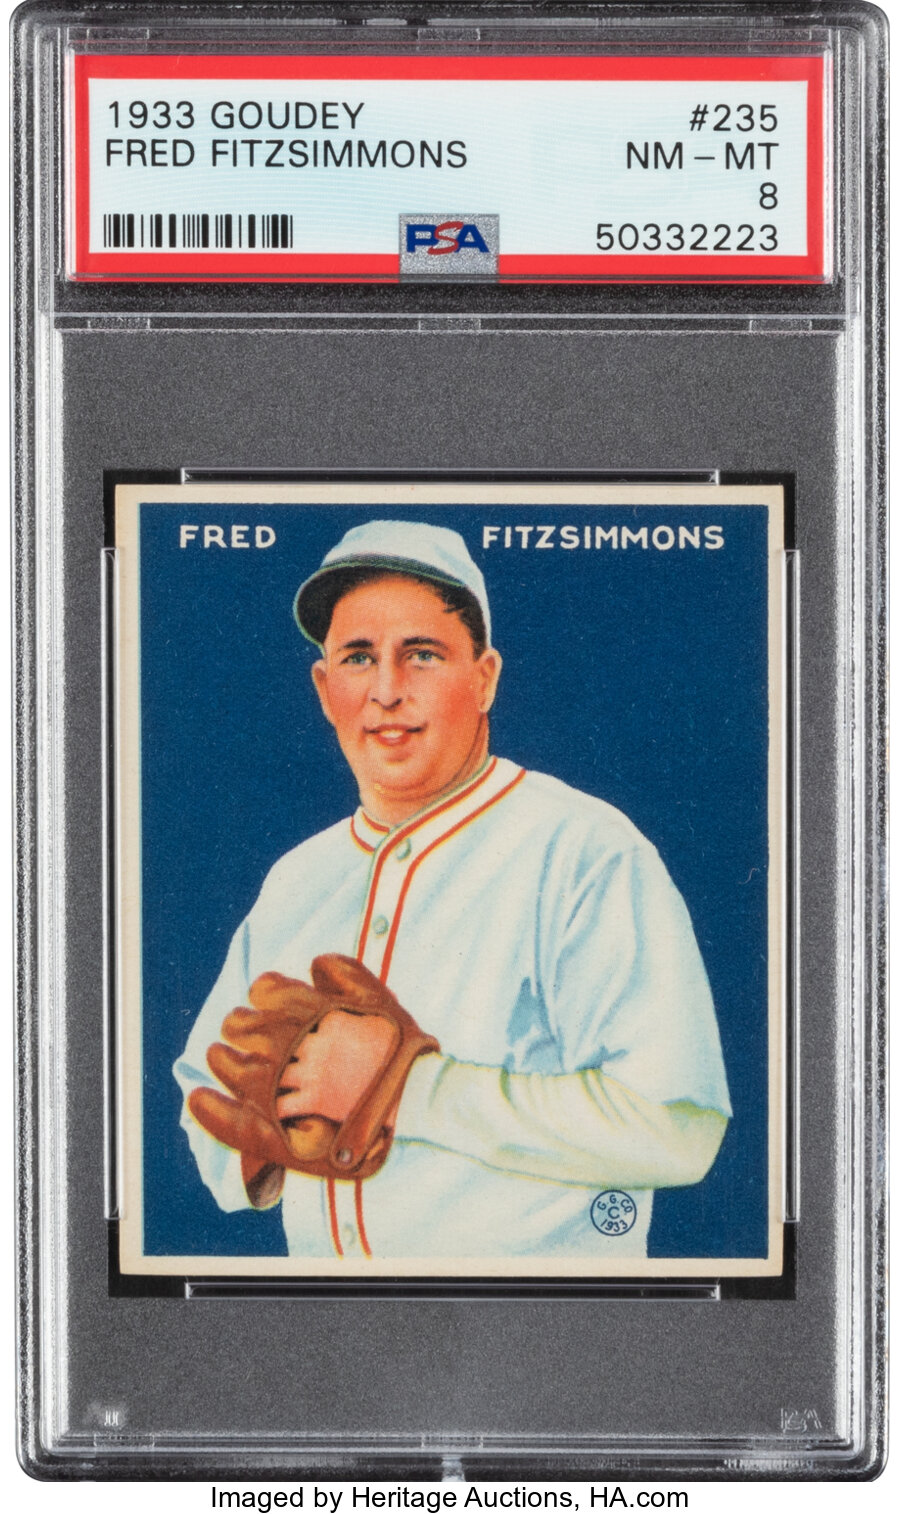 1933 Goudey Fred Fitzsimmons #235 PSA NM-MT 8 - Three Higher